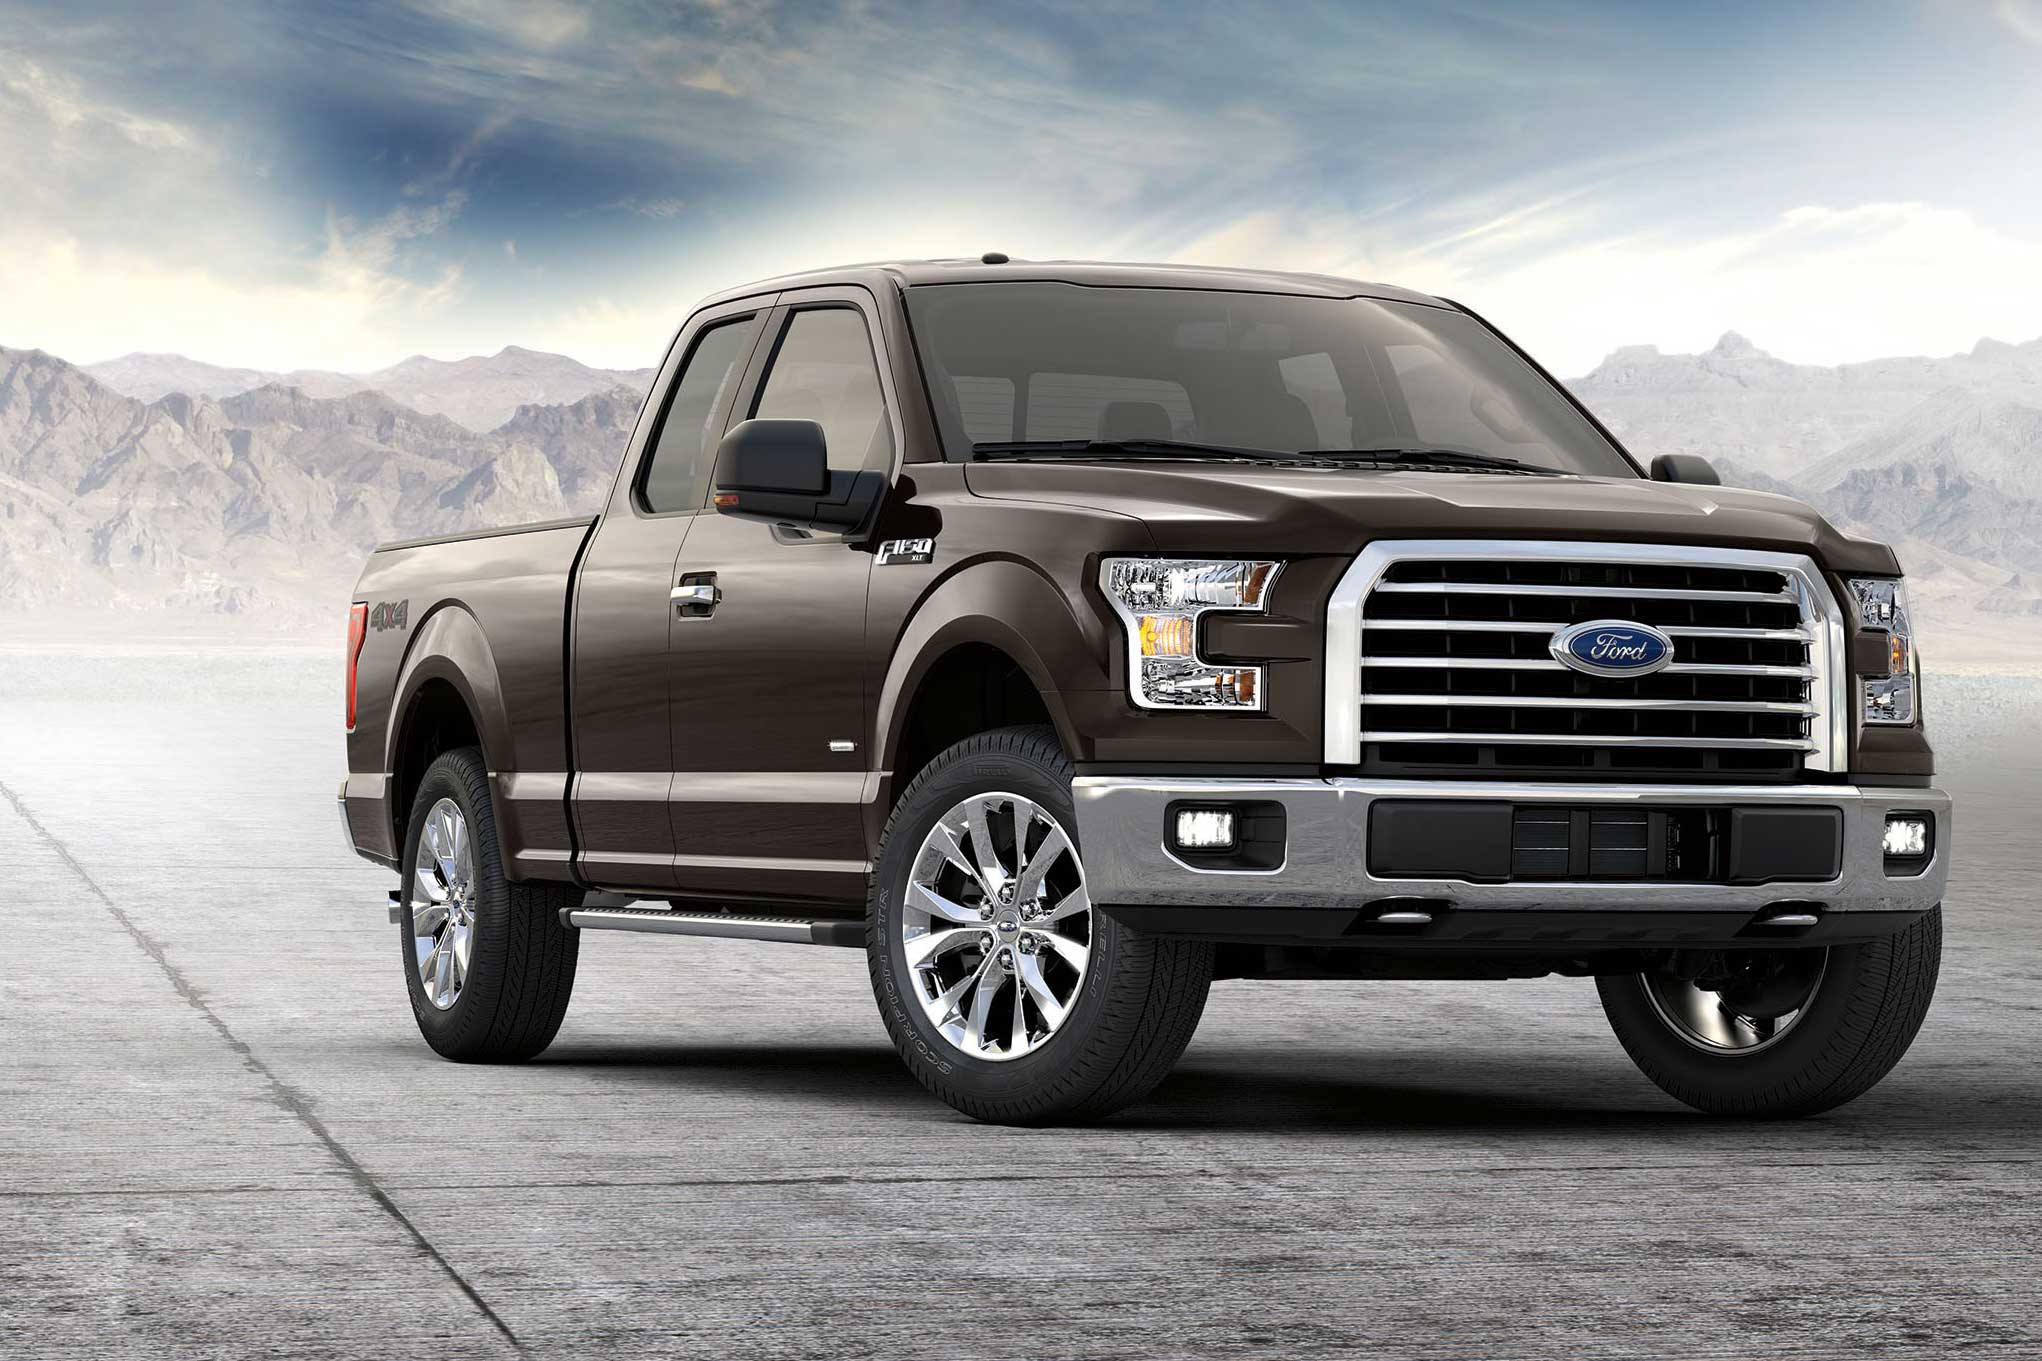 Ford F 150 Wallpapers Vehicles Hq Ford F 150 Pictures 4k Wallpapers 2019